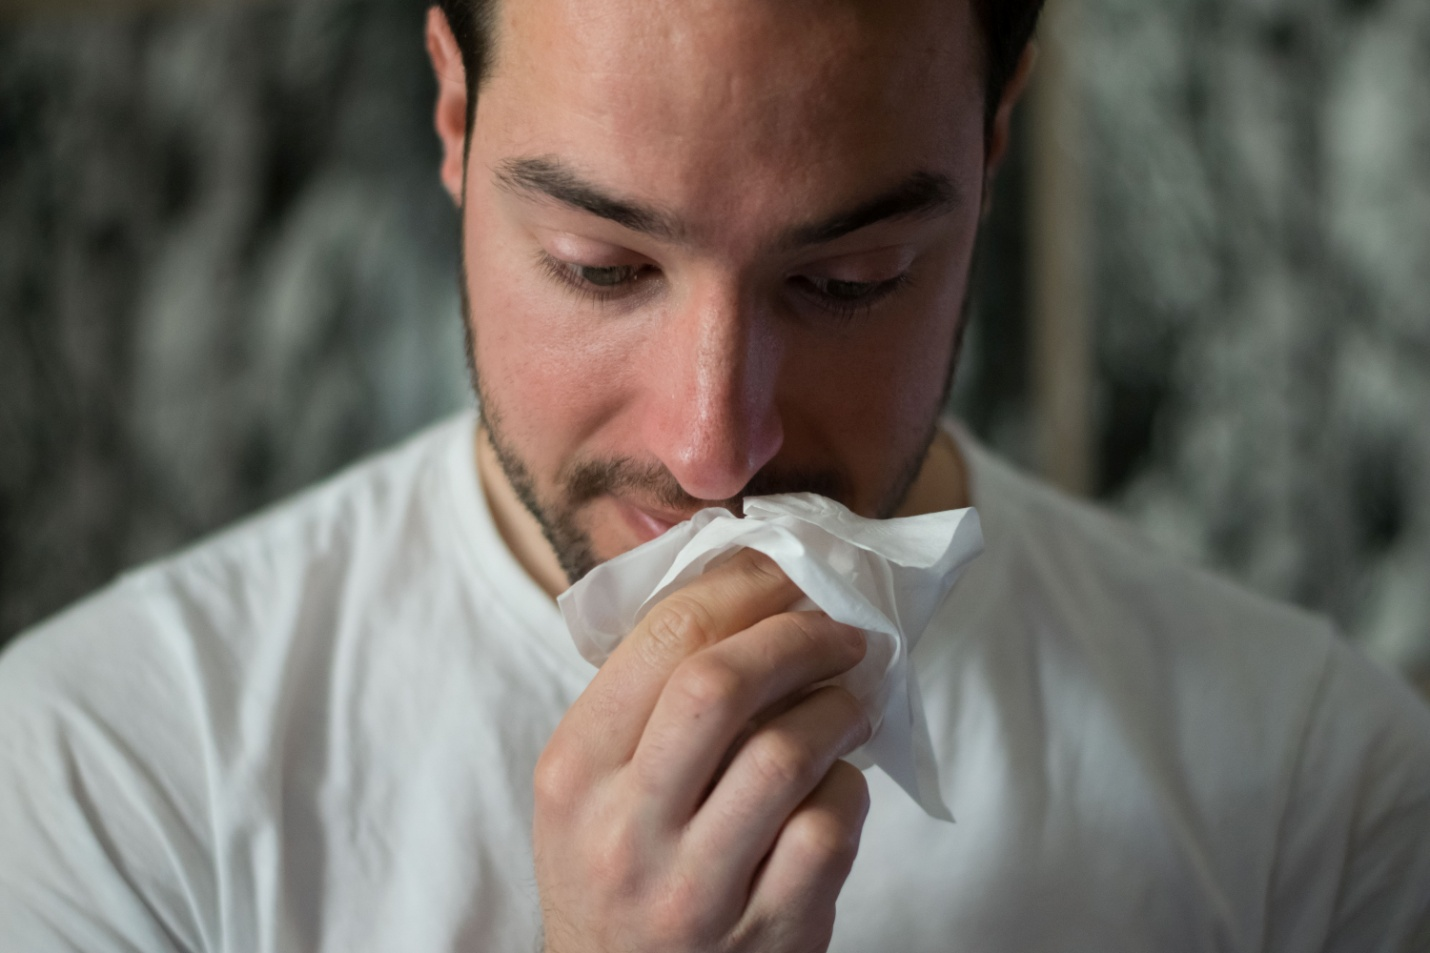 A person cleaning their a stuffy nose with a tissue